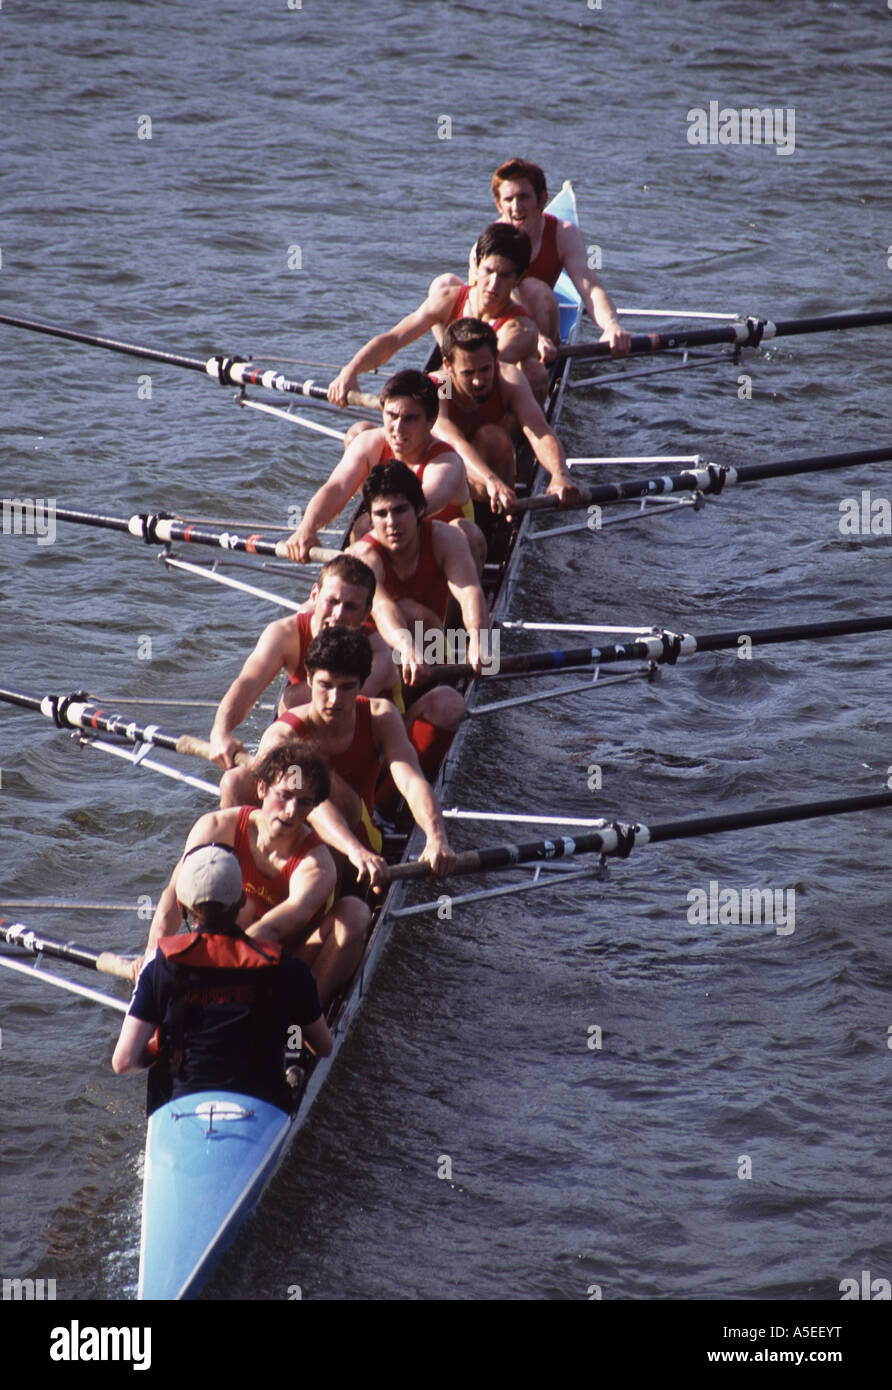 Mansfield College eights crew rowing hard, competing in the Oxford Eights boat race, Thames River, England Stock Photo